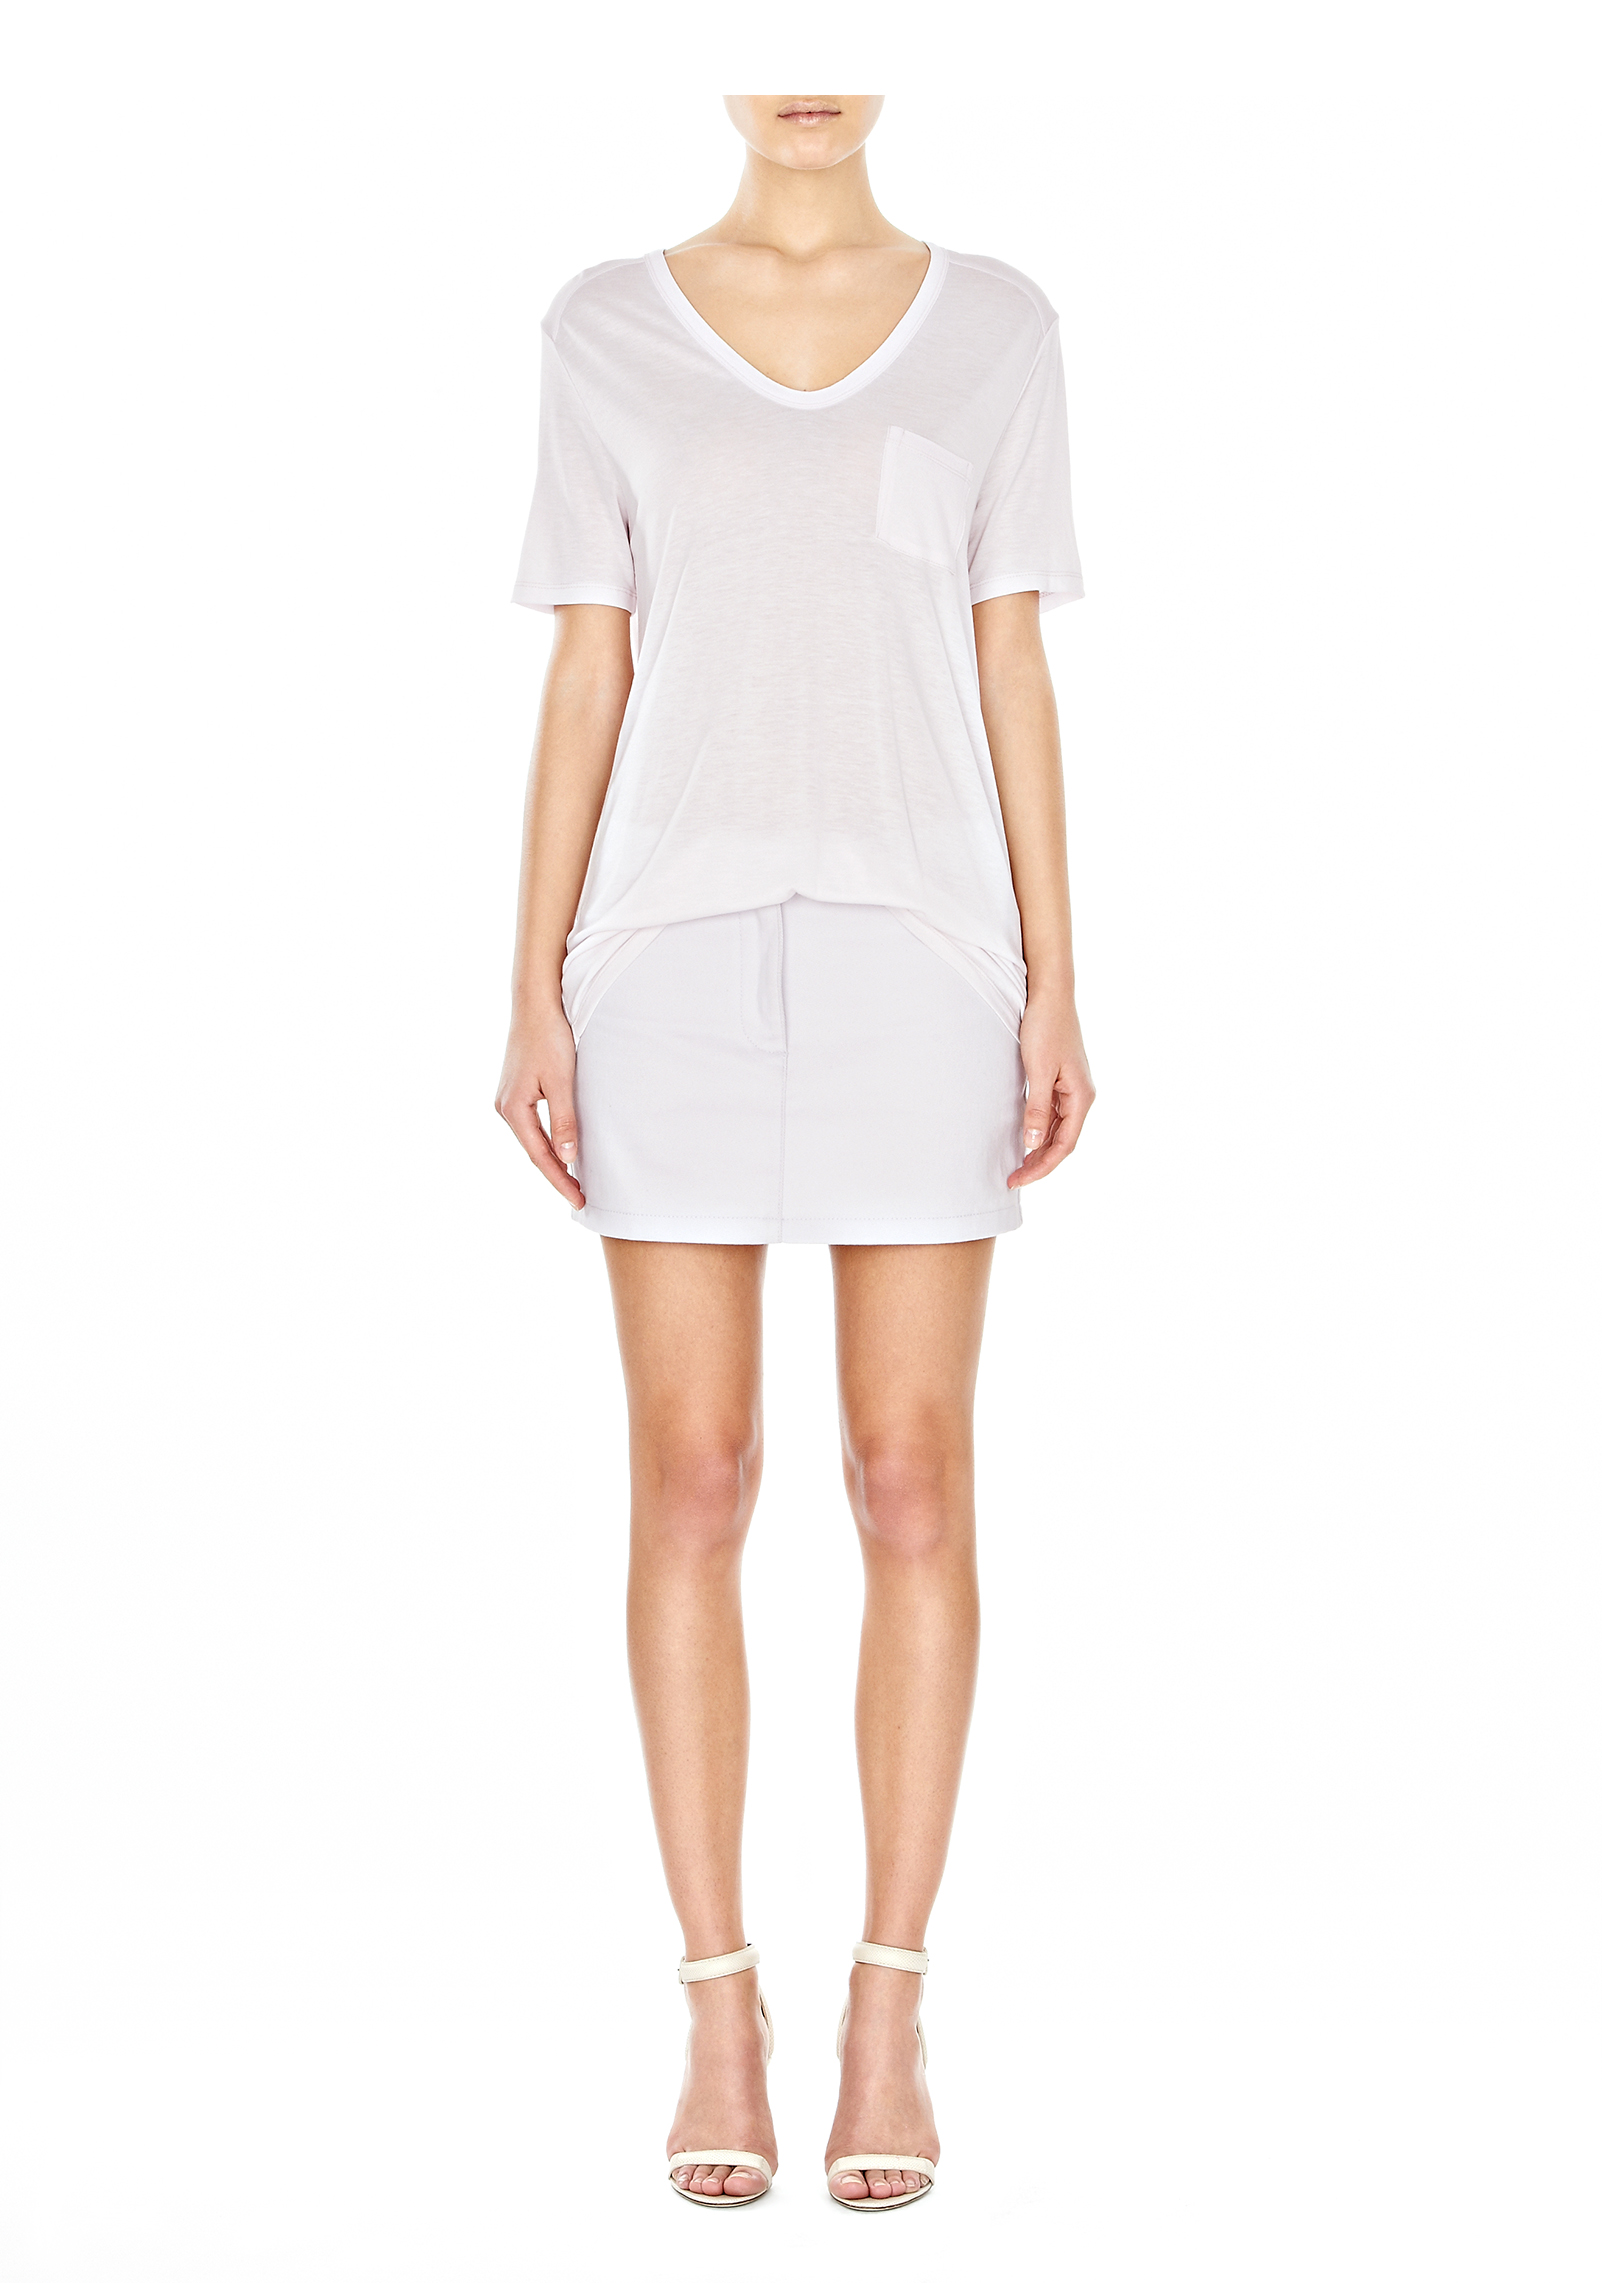 Lyst - T by alexander wang Pocket Tee in White